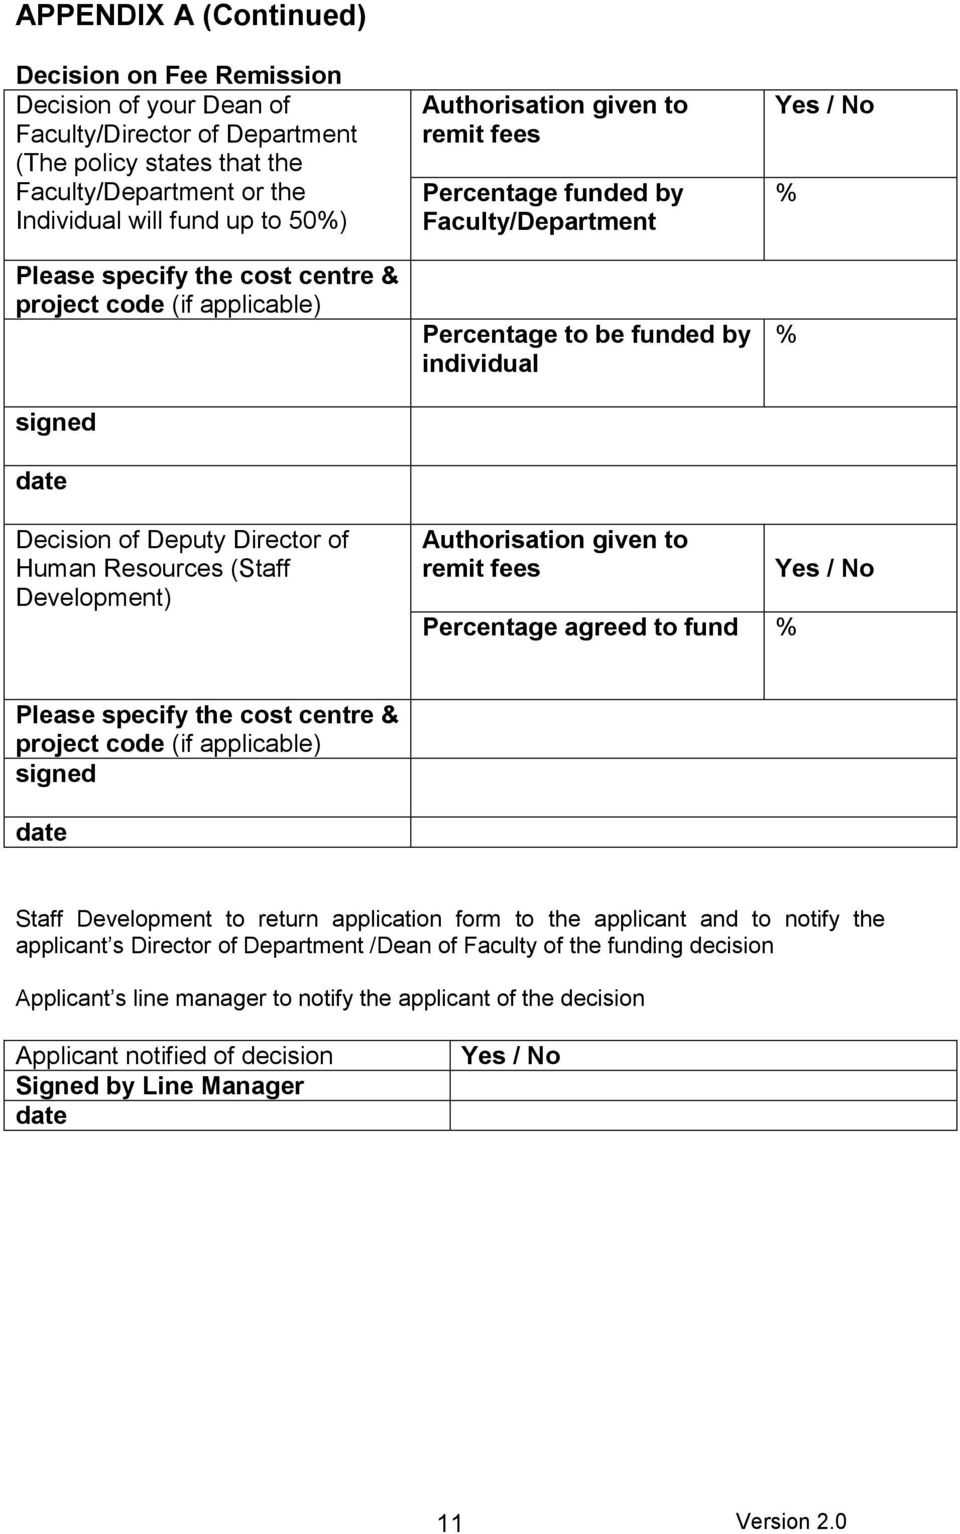 Decision of Deputy Director of Human Resources (Staff Development) Authorisation given to remit fees Percentage agreed to fund % Yes / No Please specify the cost centre & project code (if applicable)